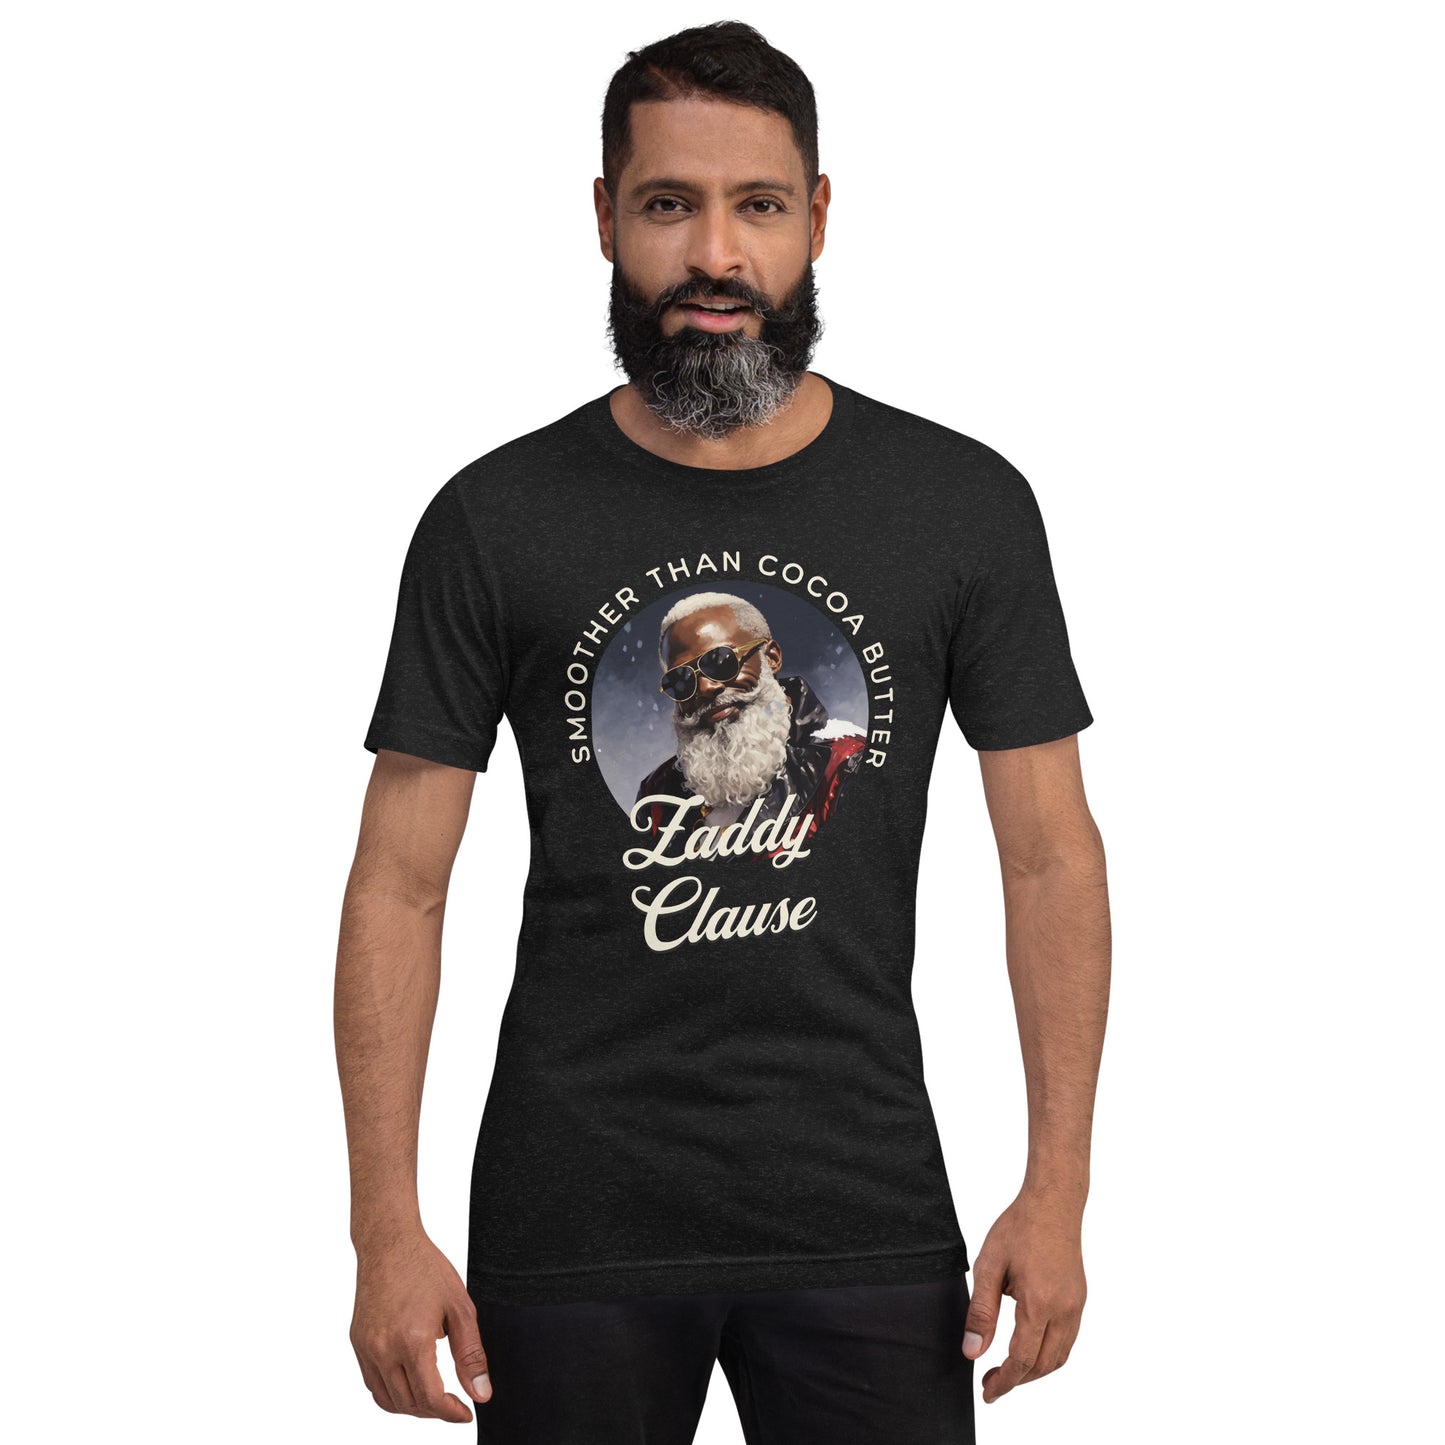 Zaddy Clause Funny Christmas T-shirt, Holiday Shirt for gift for him